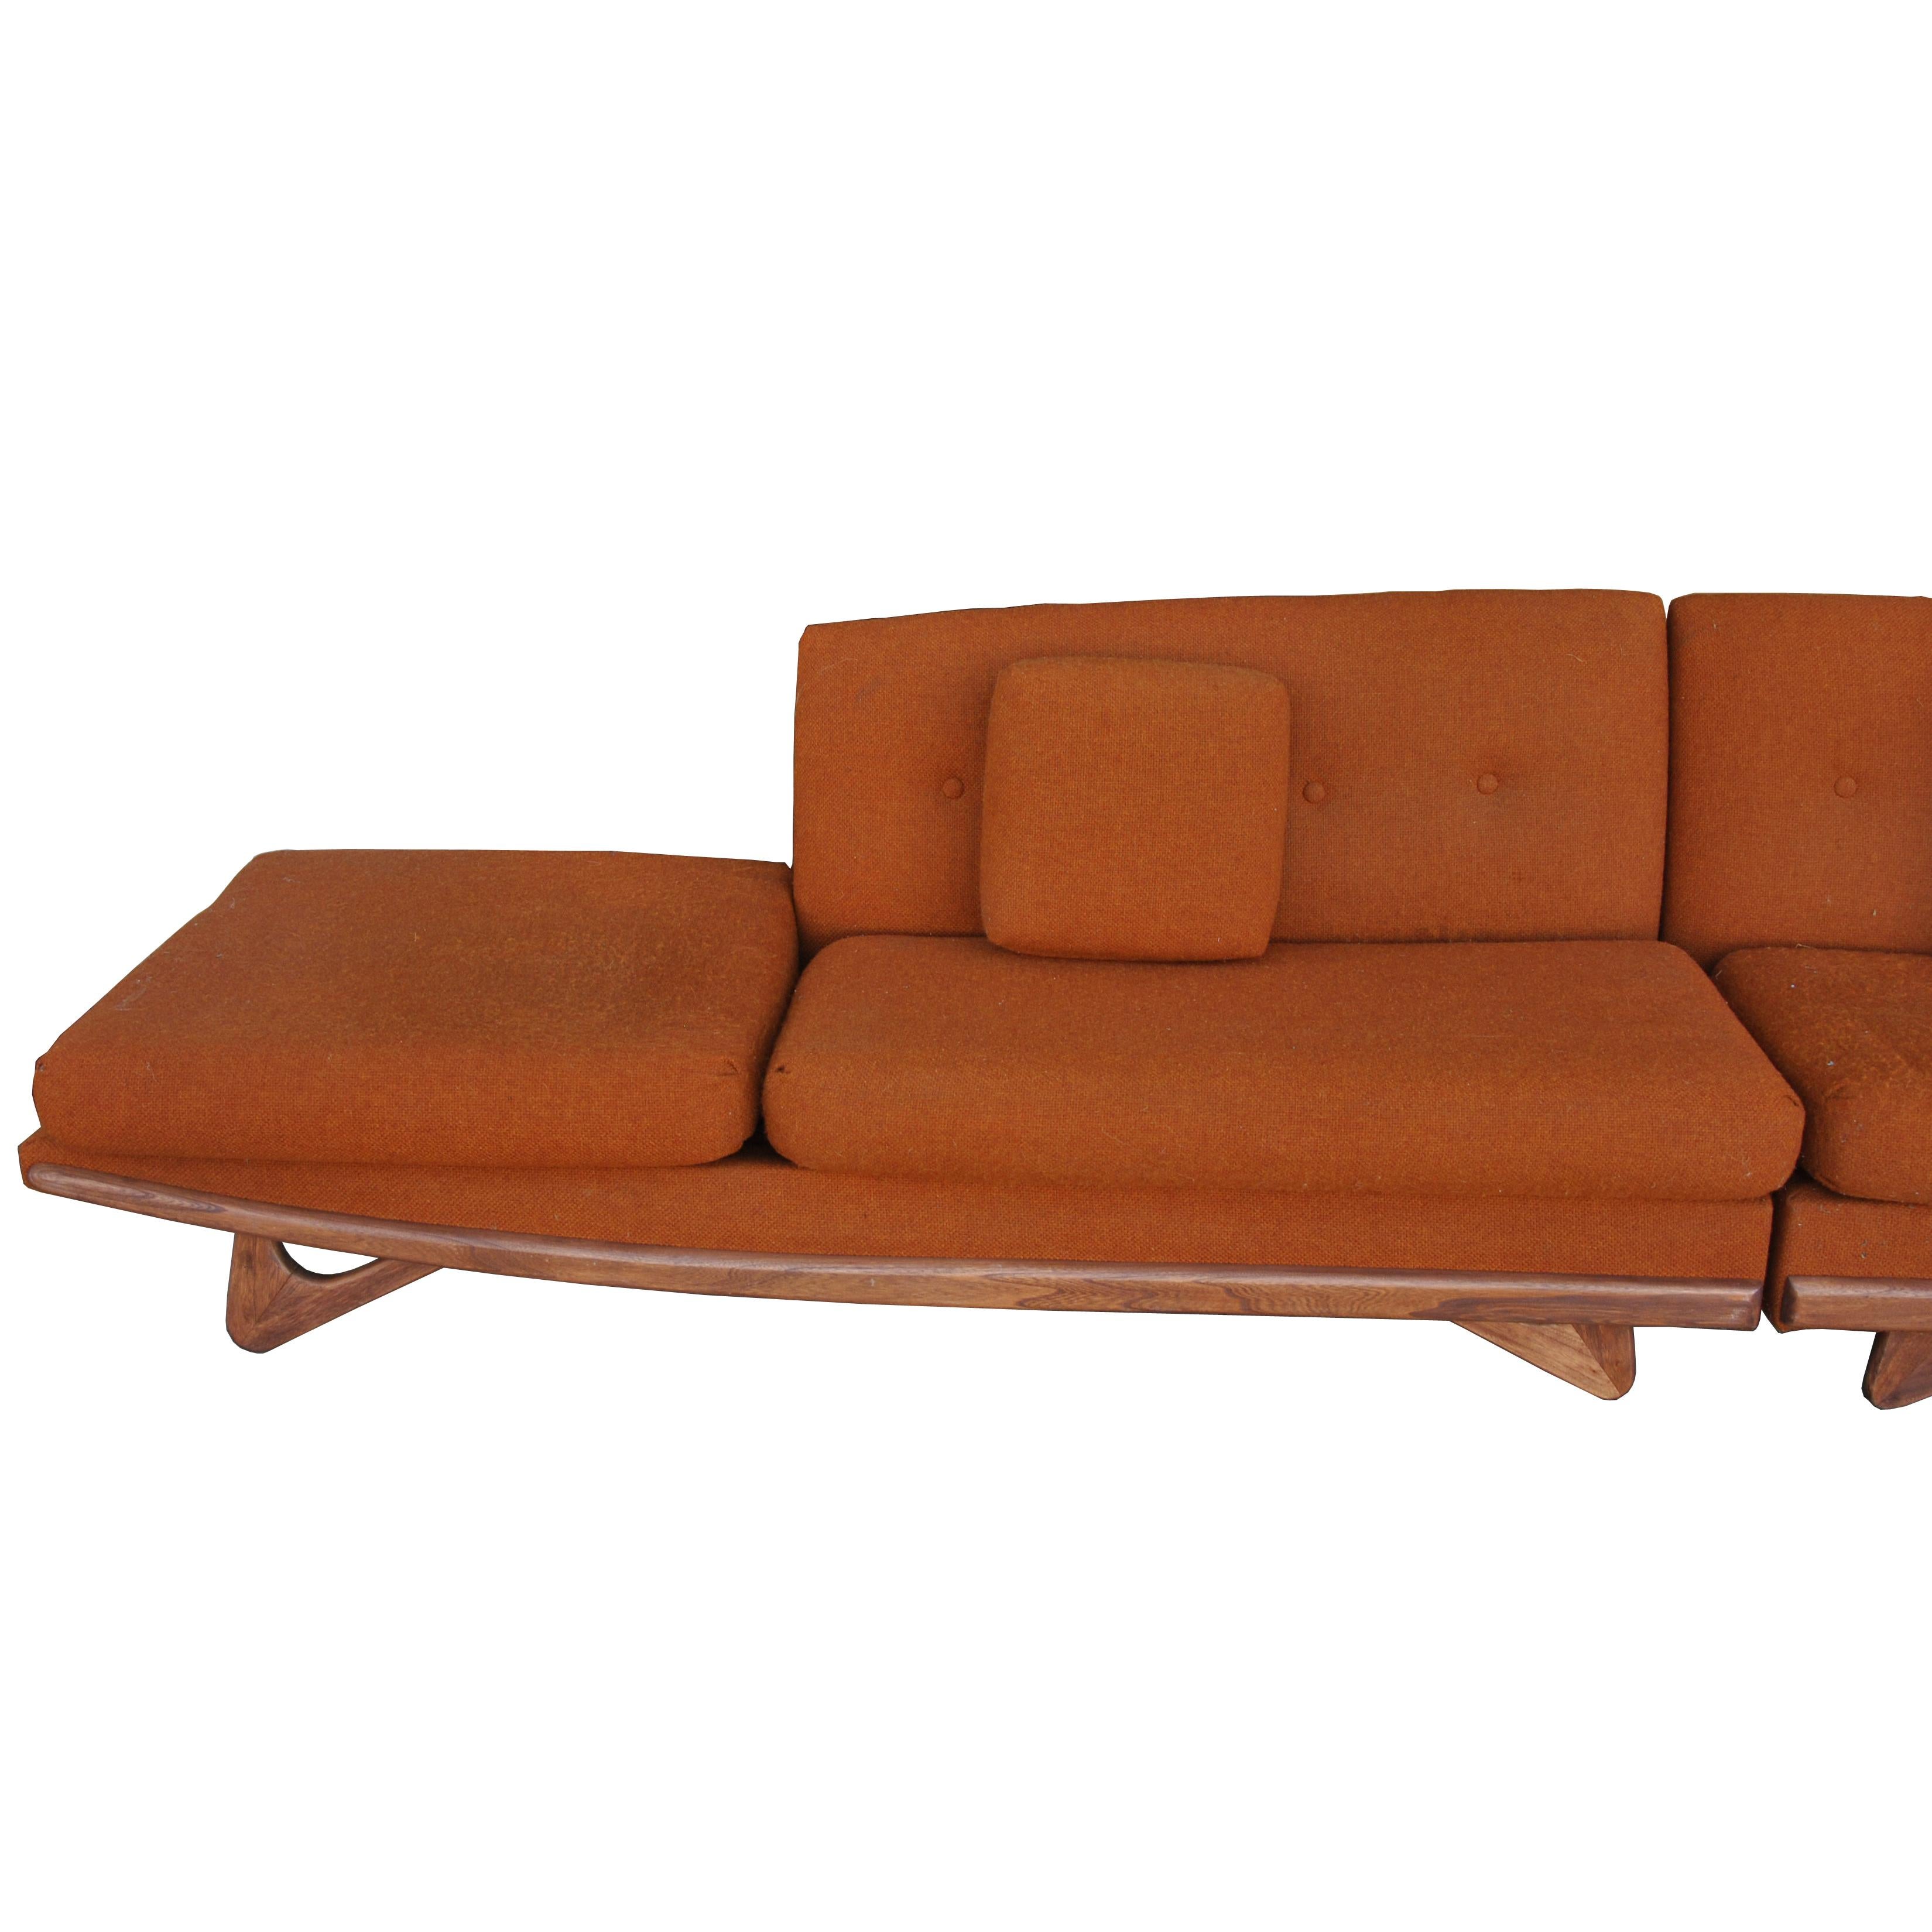 Mid-20th Century Adrian Pearsall For Craft Associates Sectional Sofa  For Sale